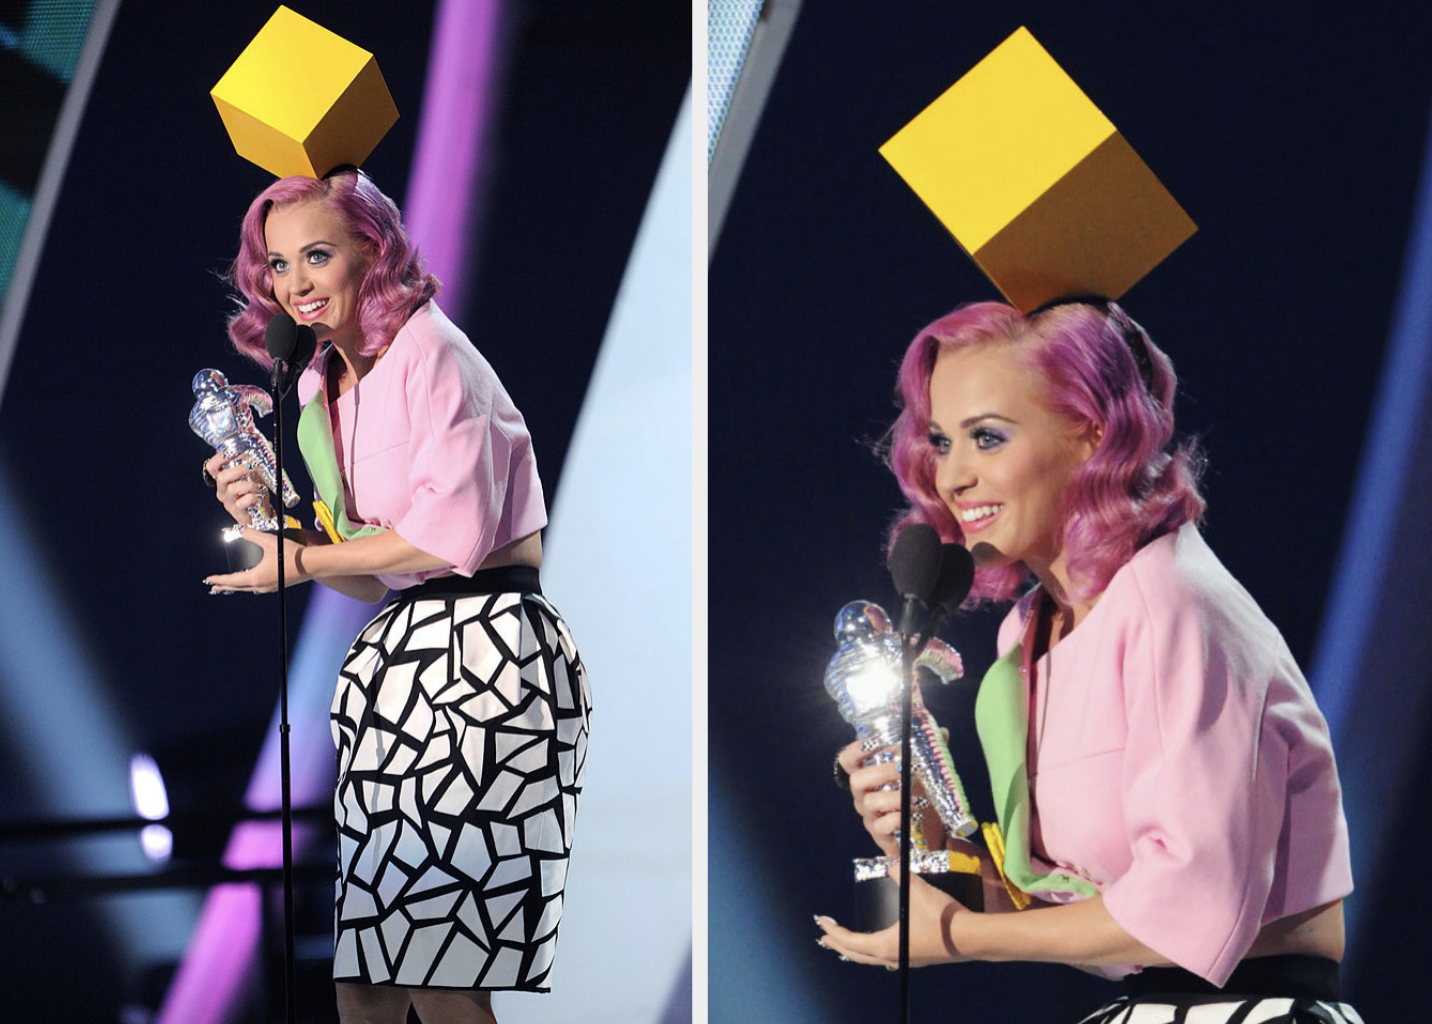 Katy Perry accepting her award with a yellow cube on her head